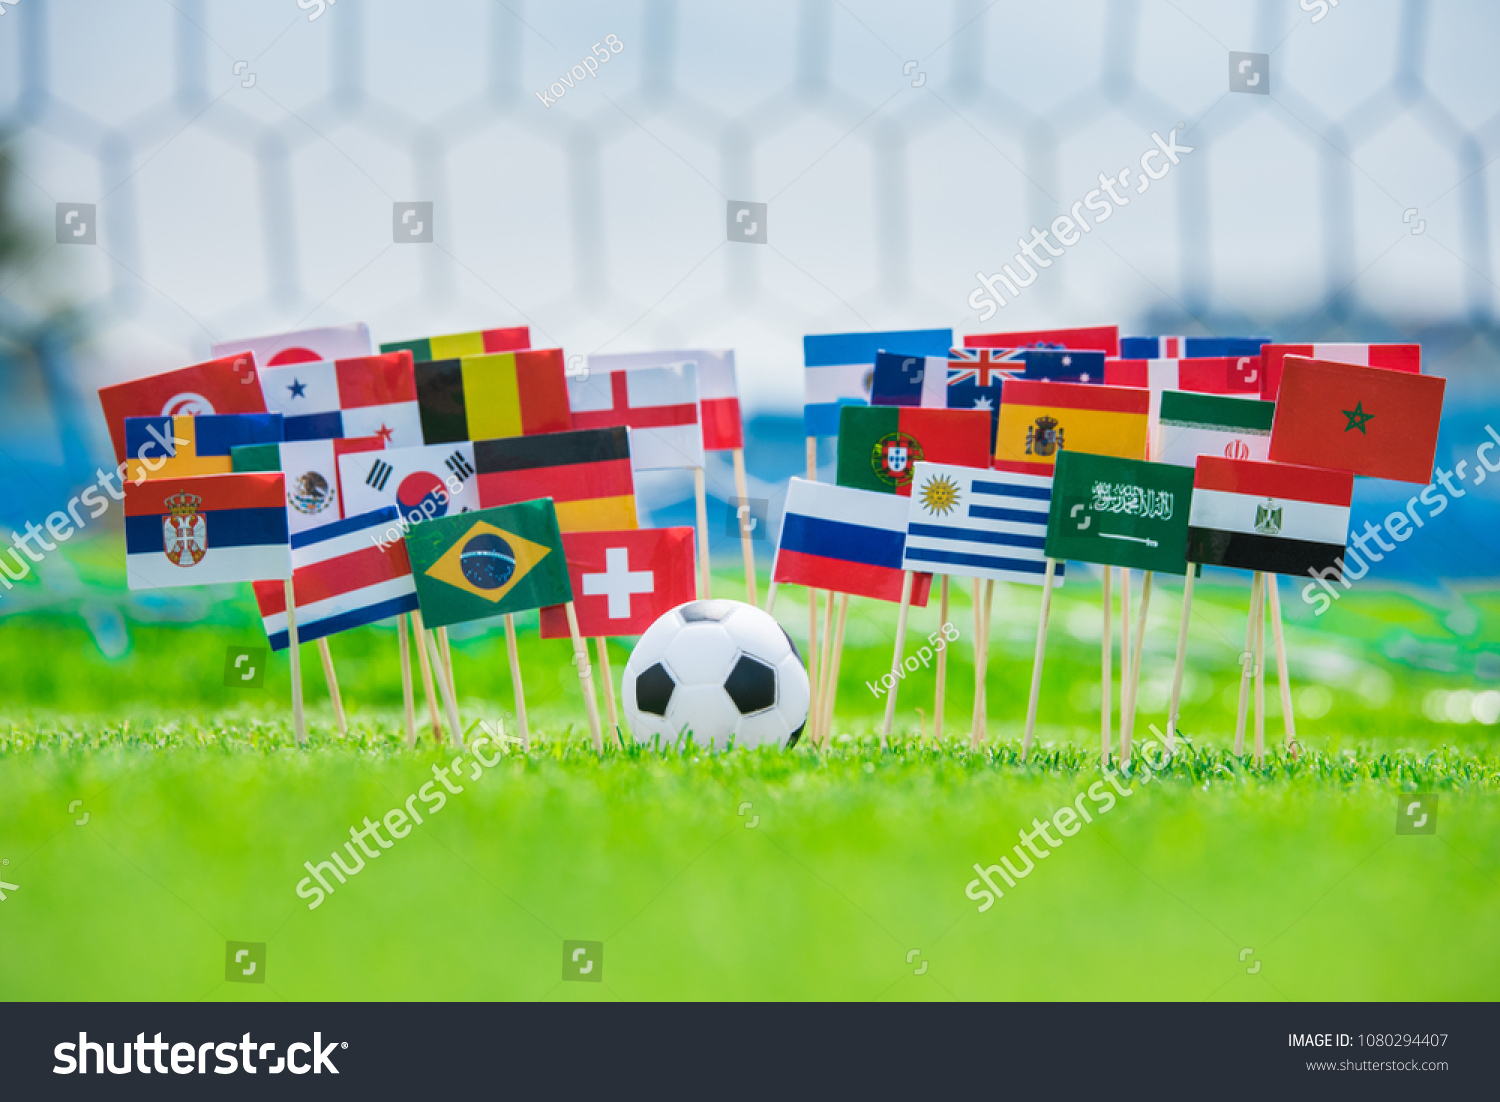 MOSCOW, RUSSIA - APRIL, 24, 2018: All nations flag of FIFA Football World Cup 2018 in Russia. Fans support concept photo. #1080294407